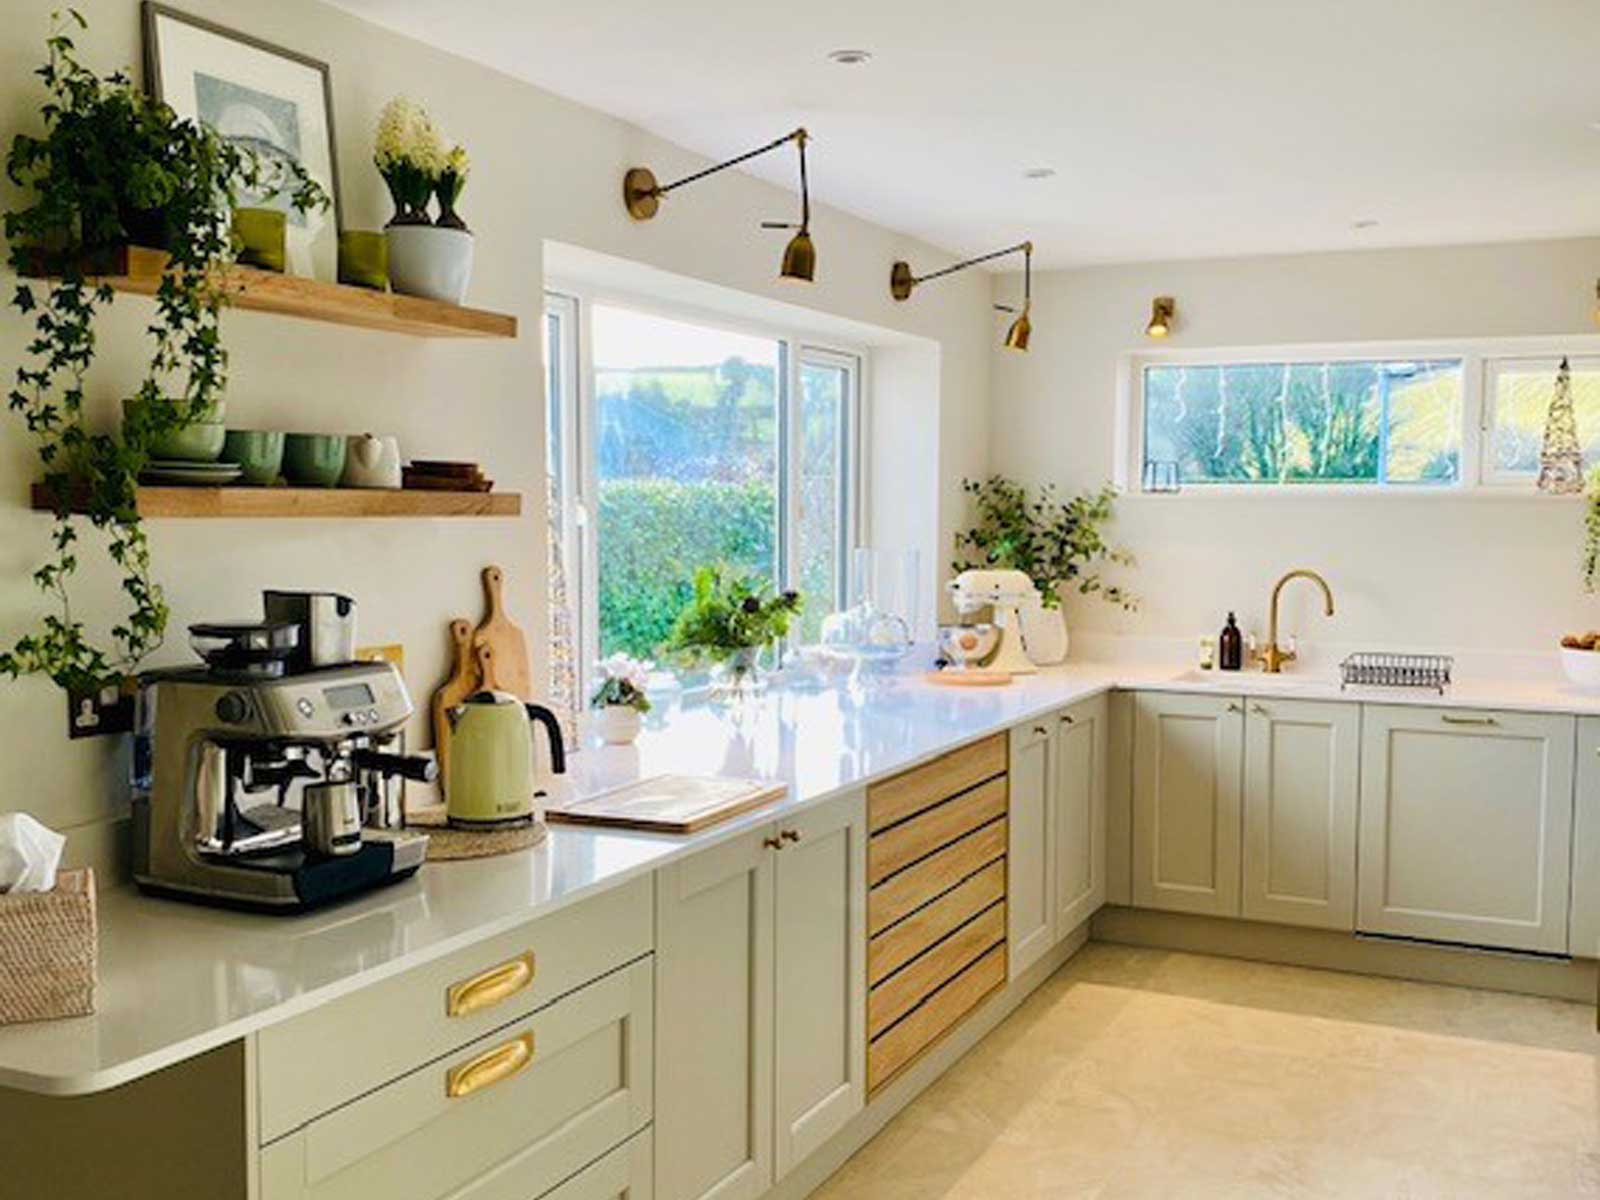 A biophilic design natural kitchen with natural stone countertops